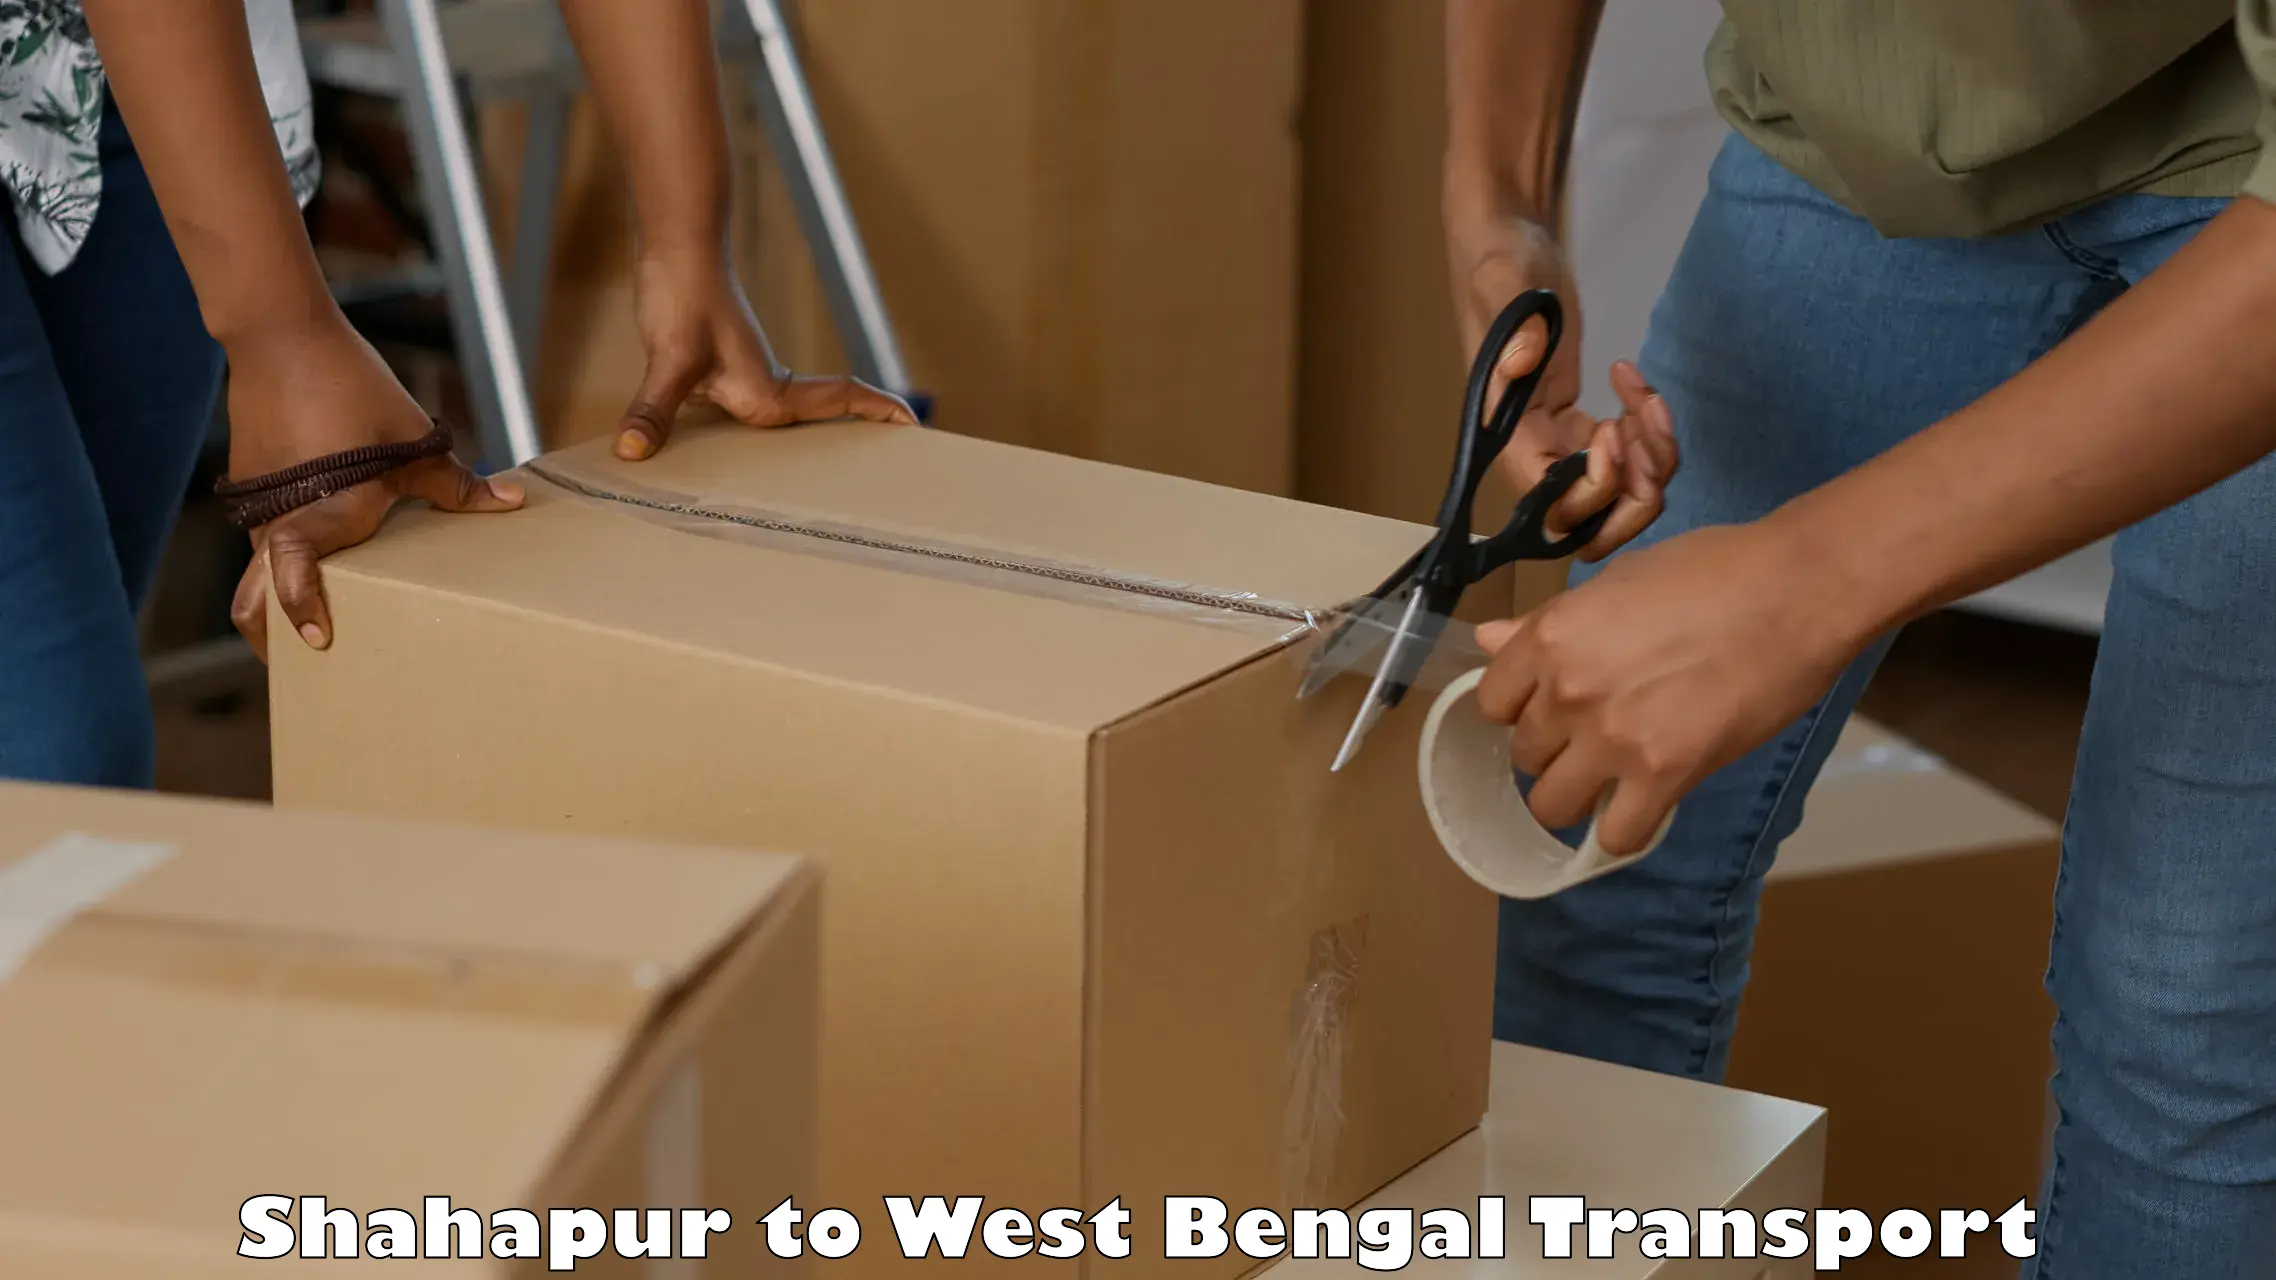 Furniture transport service in Shahapur to Jhargram